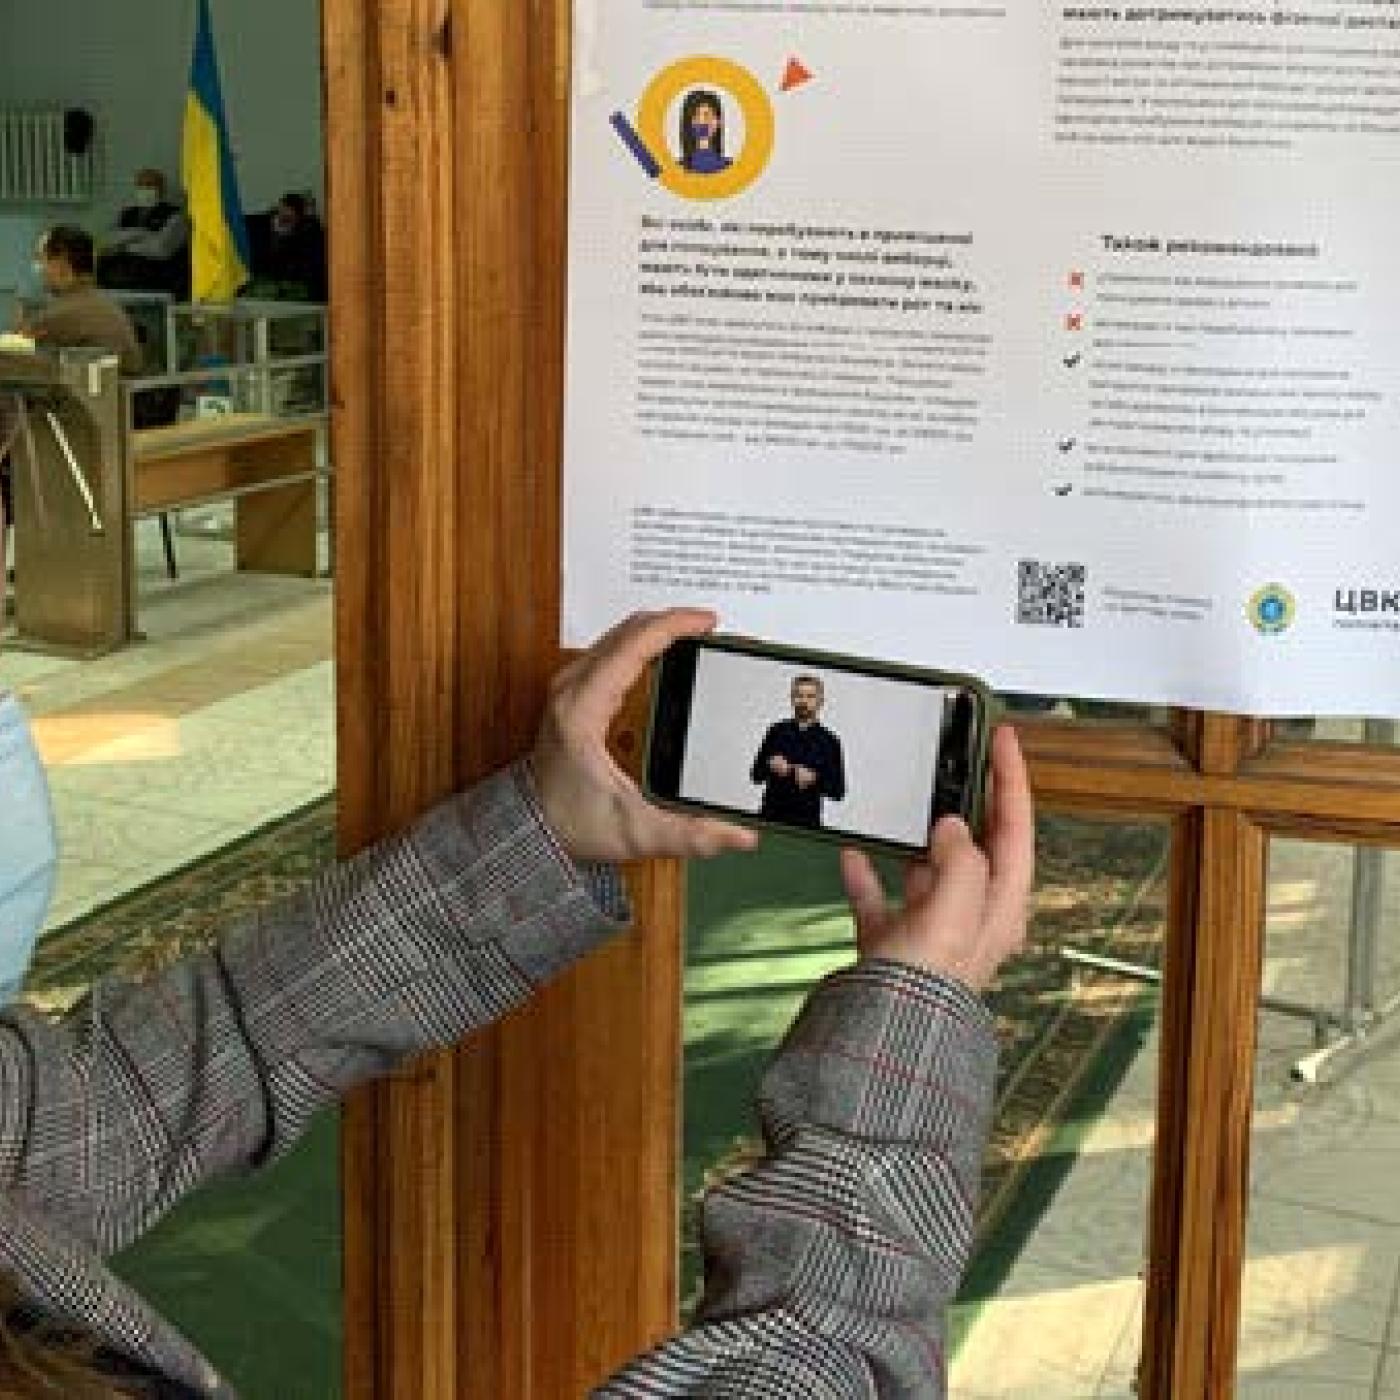 A woman holds up a smartphone to scan a QR code on a poster. Her smartphone plays a video of a person using sign language.